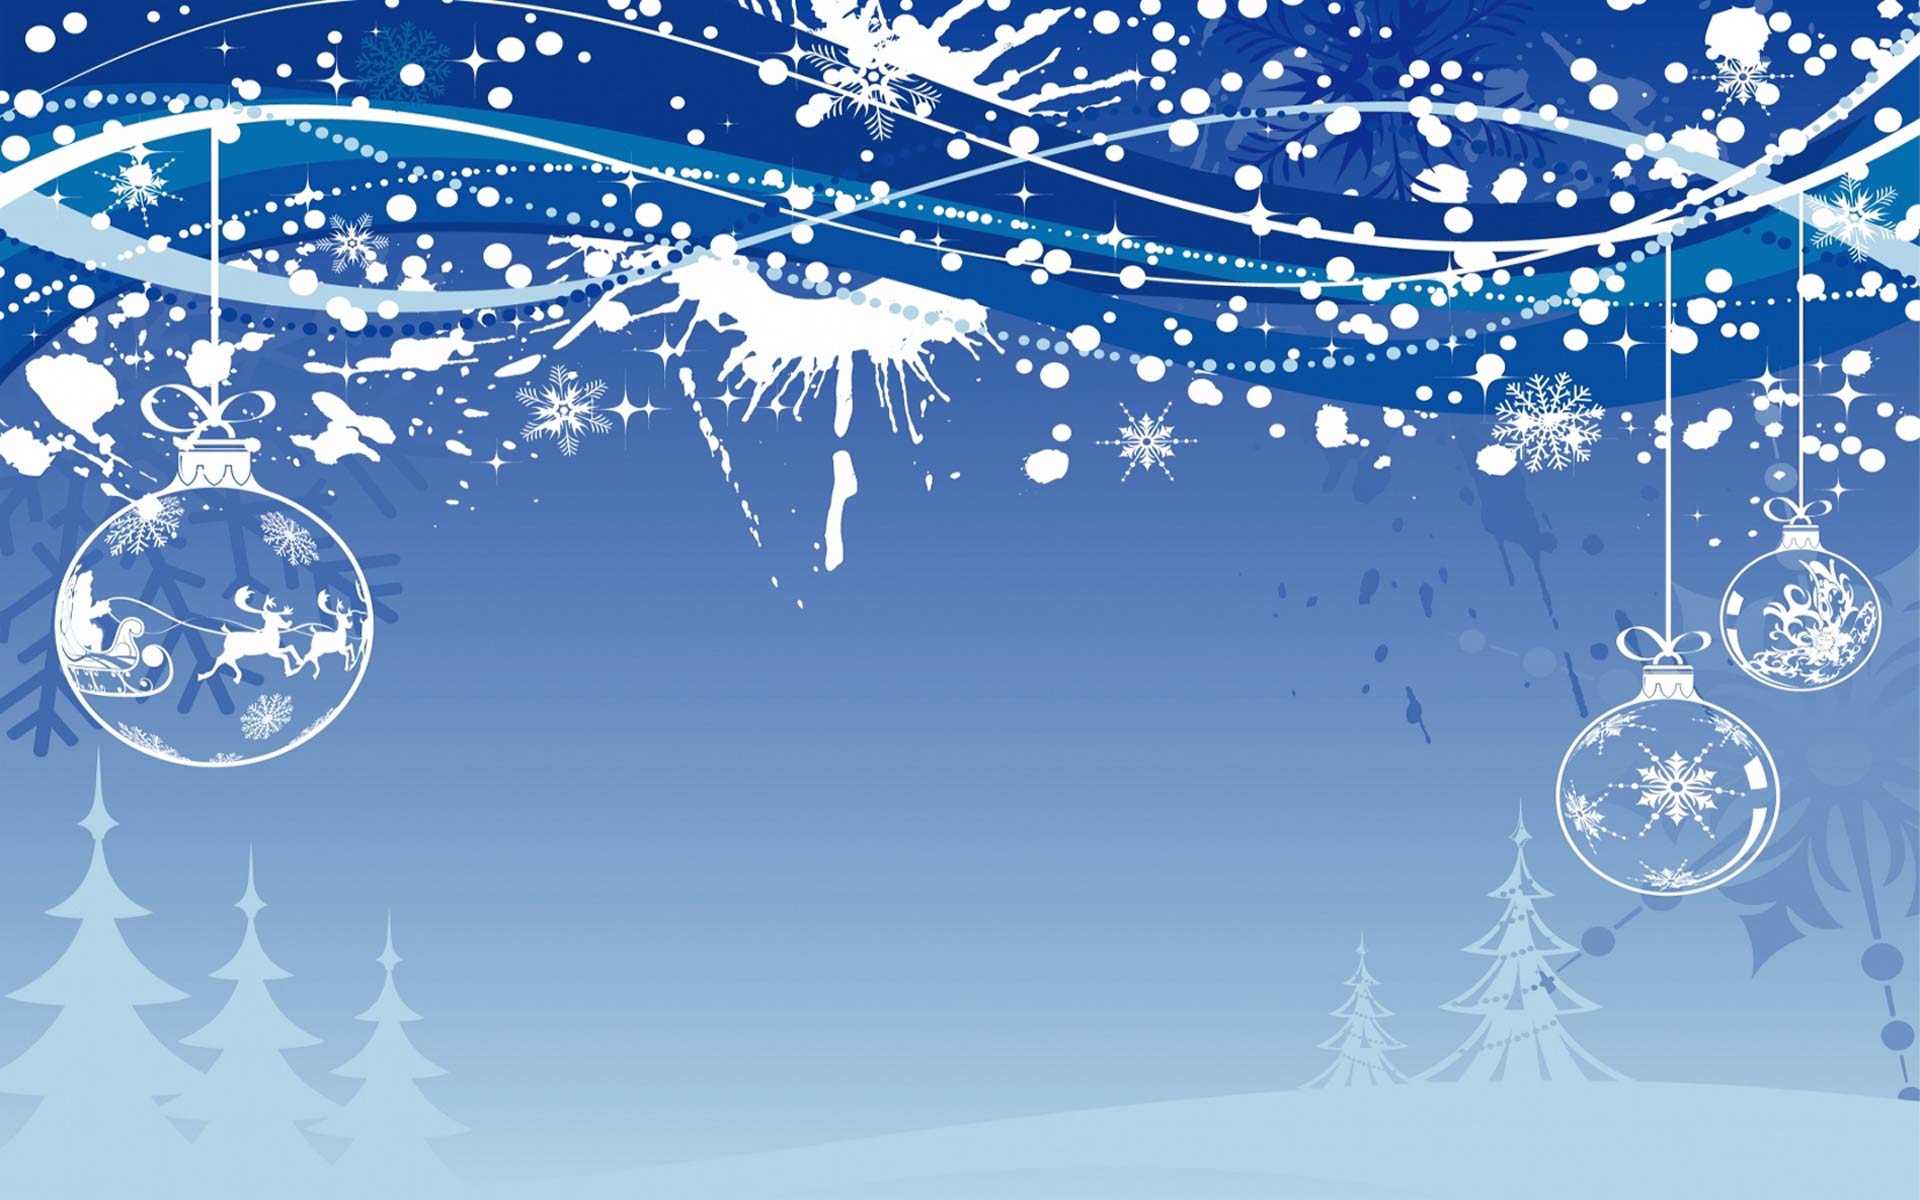 Like Or Share Live Christmas Wallpaper Android On